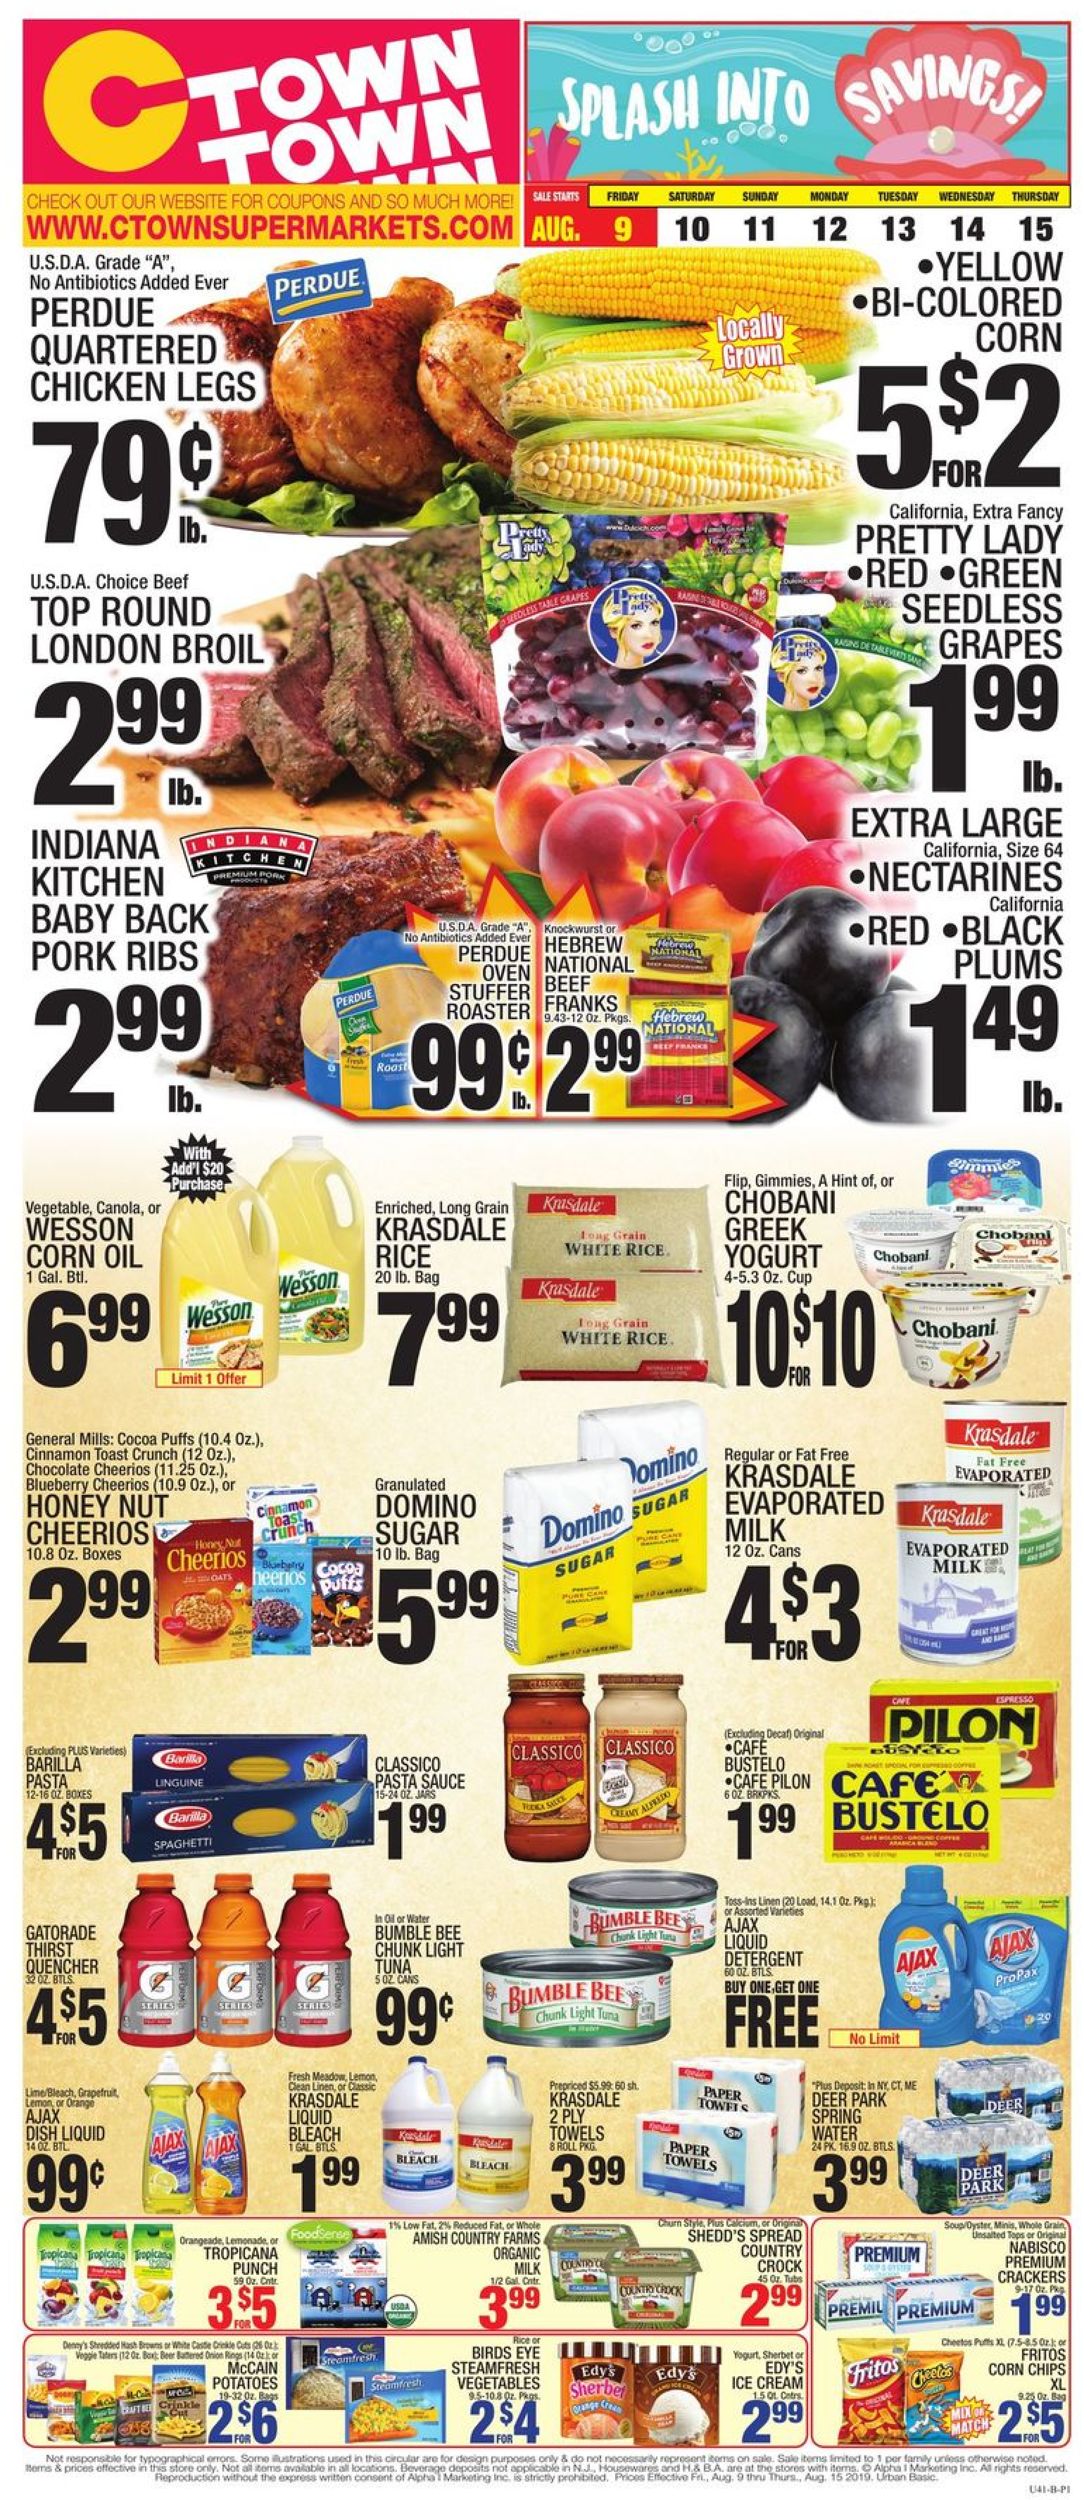 C-Town Current weekly ad 08/09 - 08/15/2019 - frequent-ads.com